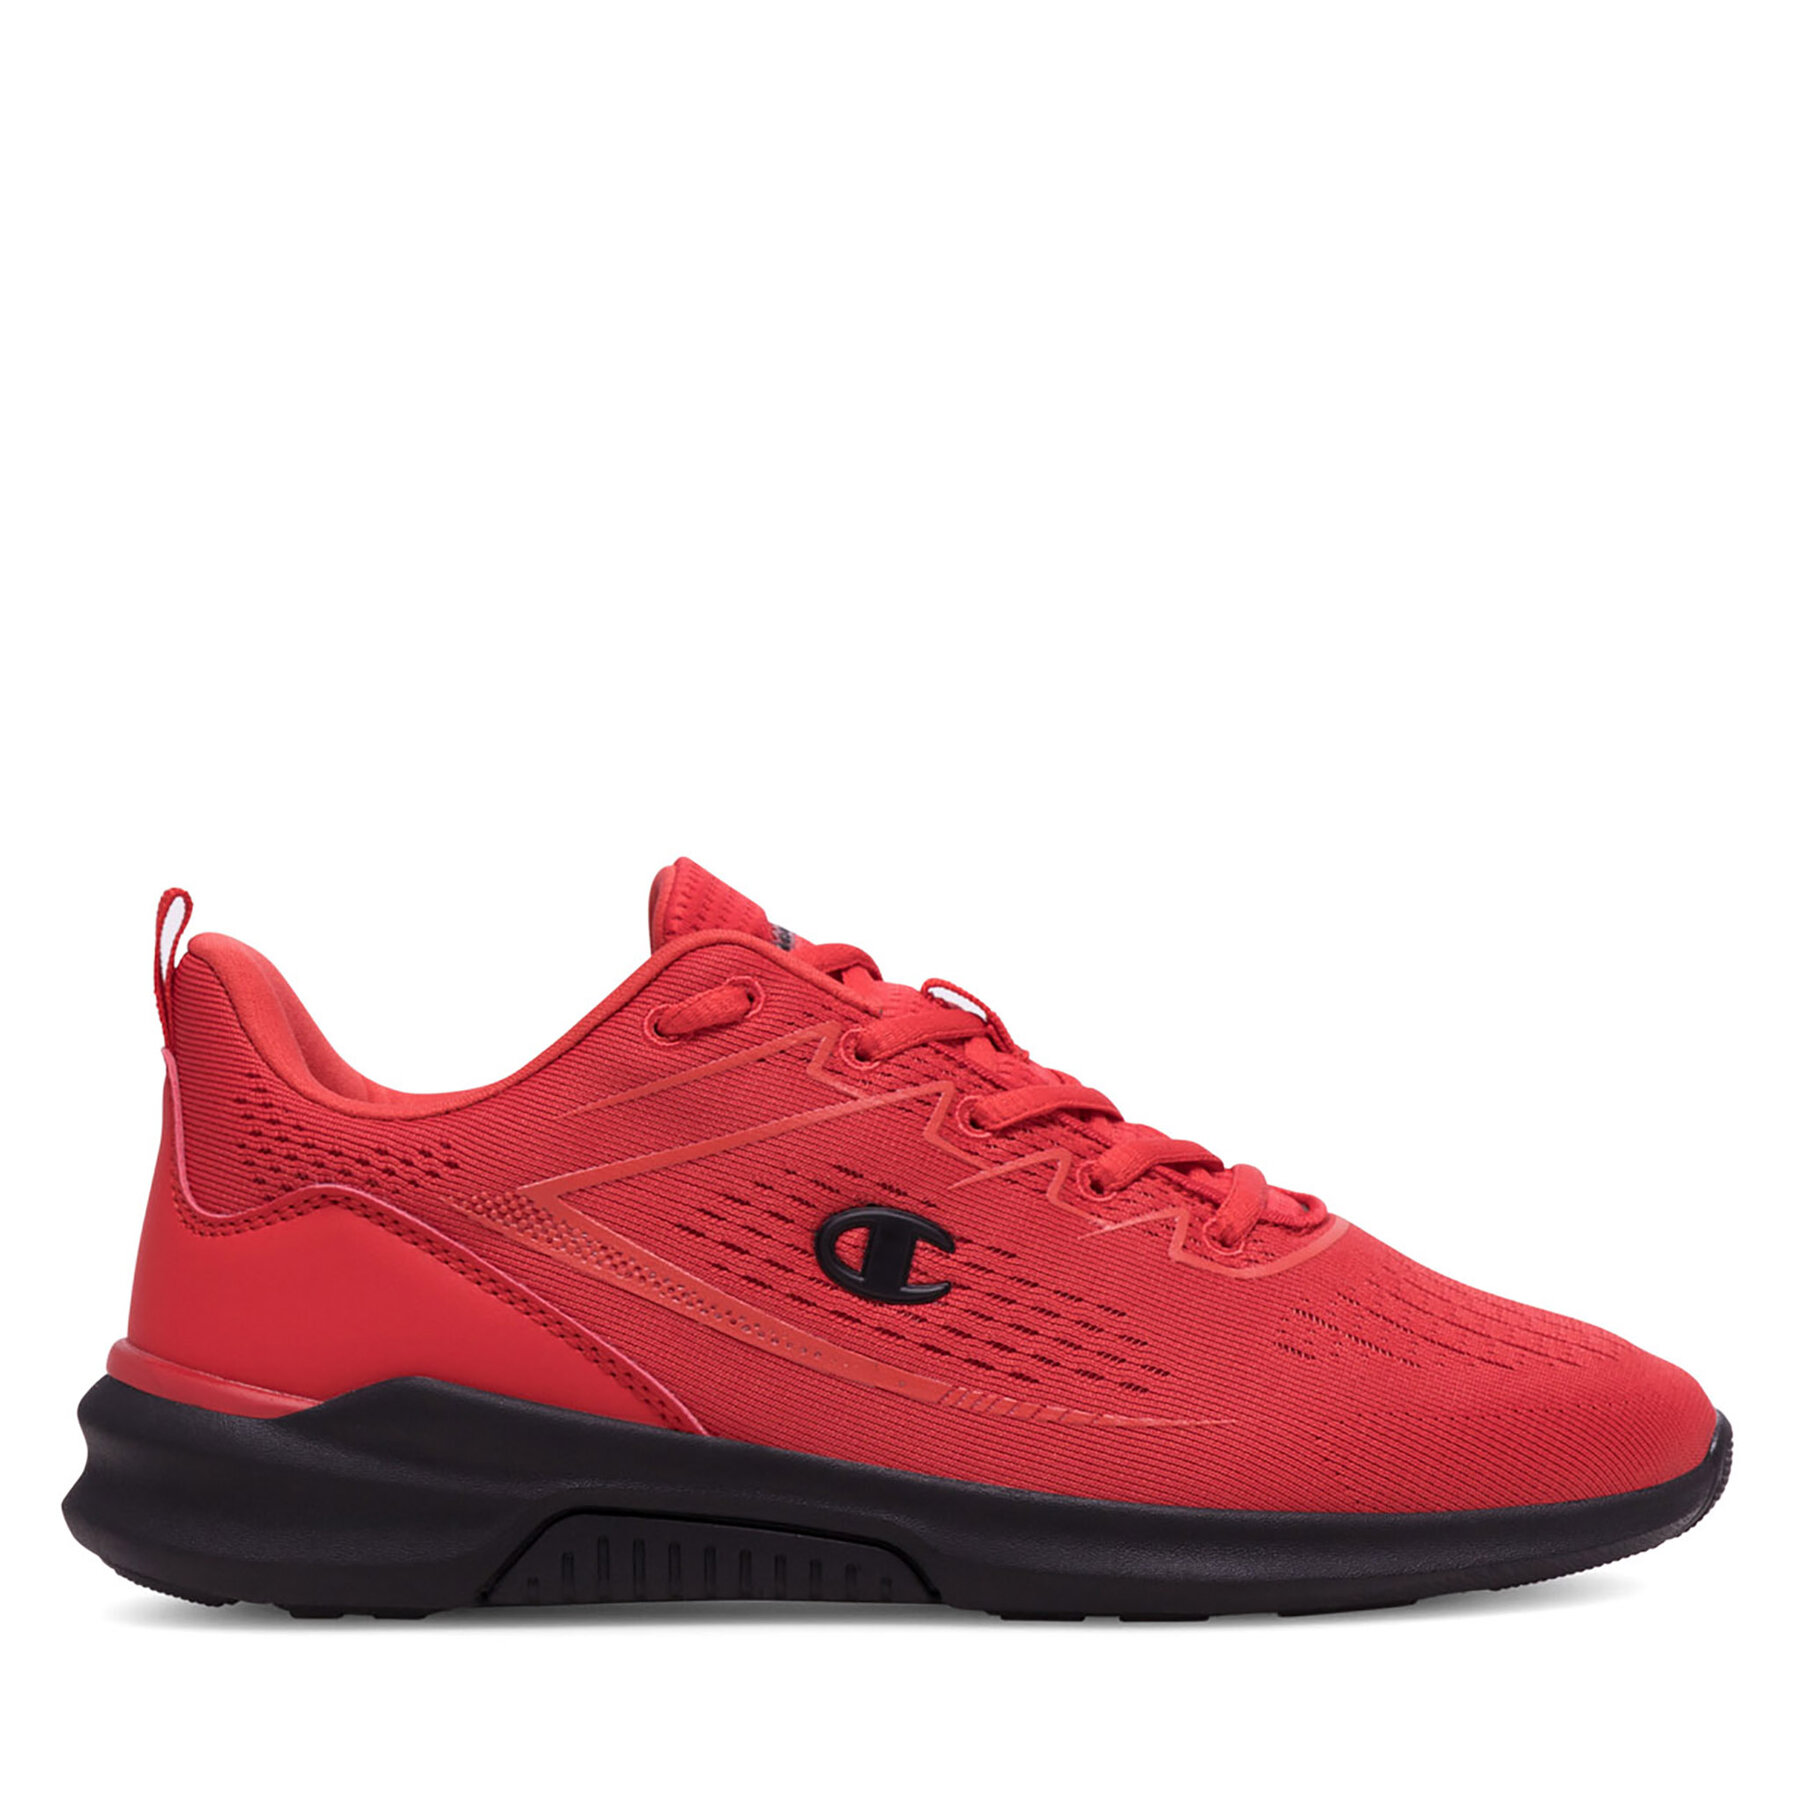 Sneakers Champion NIMBLE GS S32747-RS001 Rot von Champion